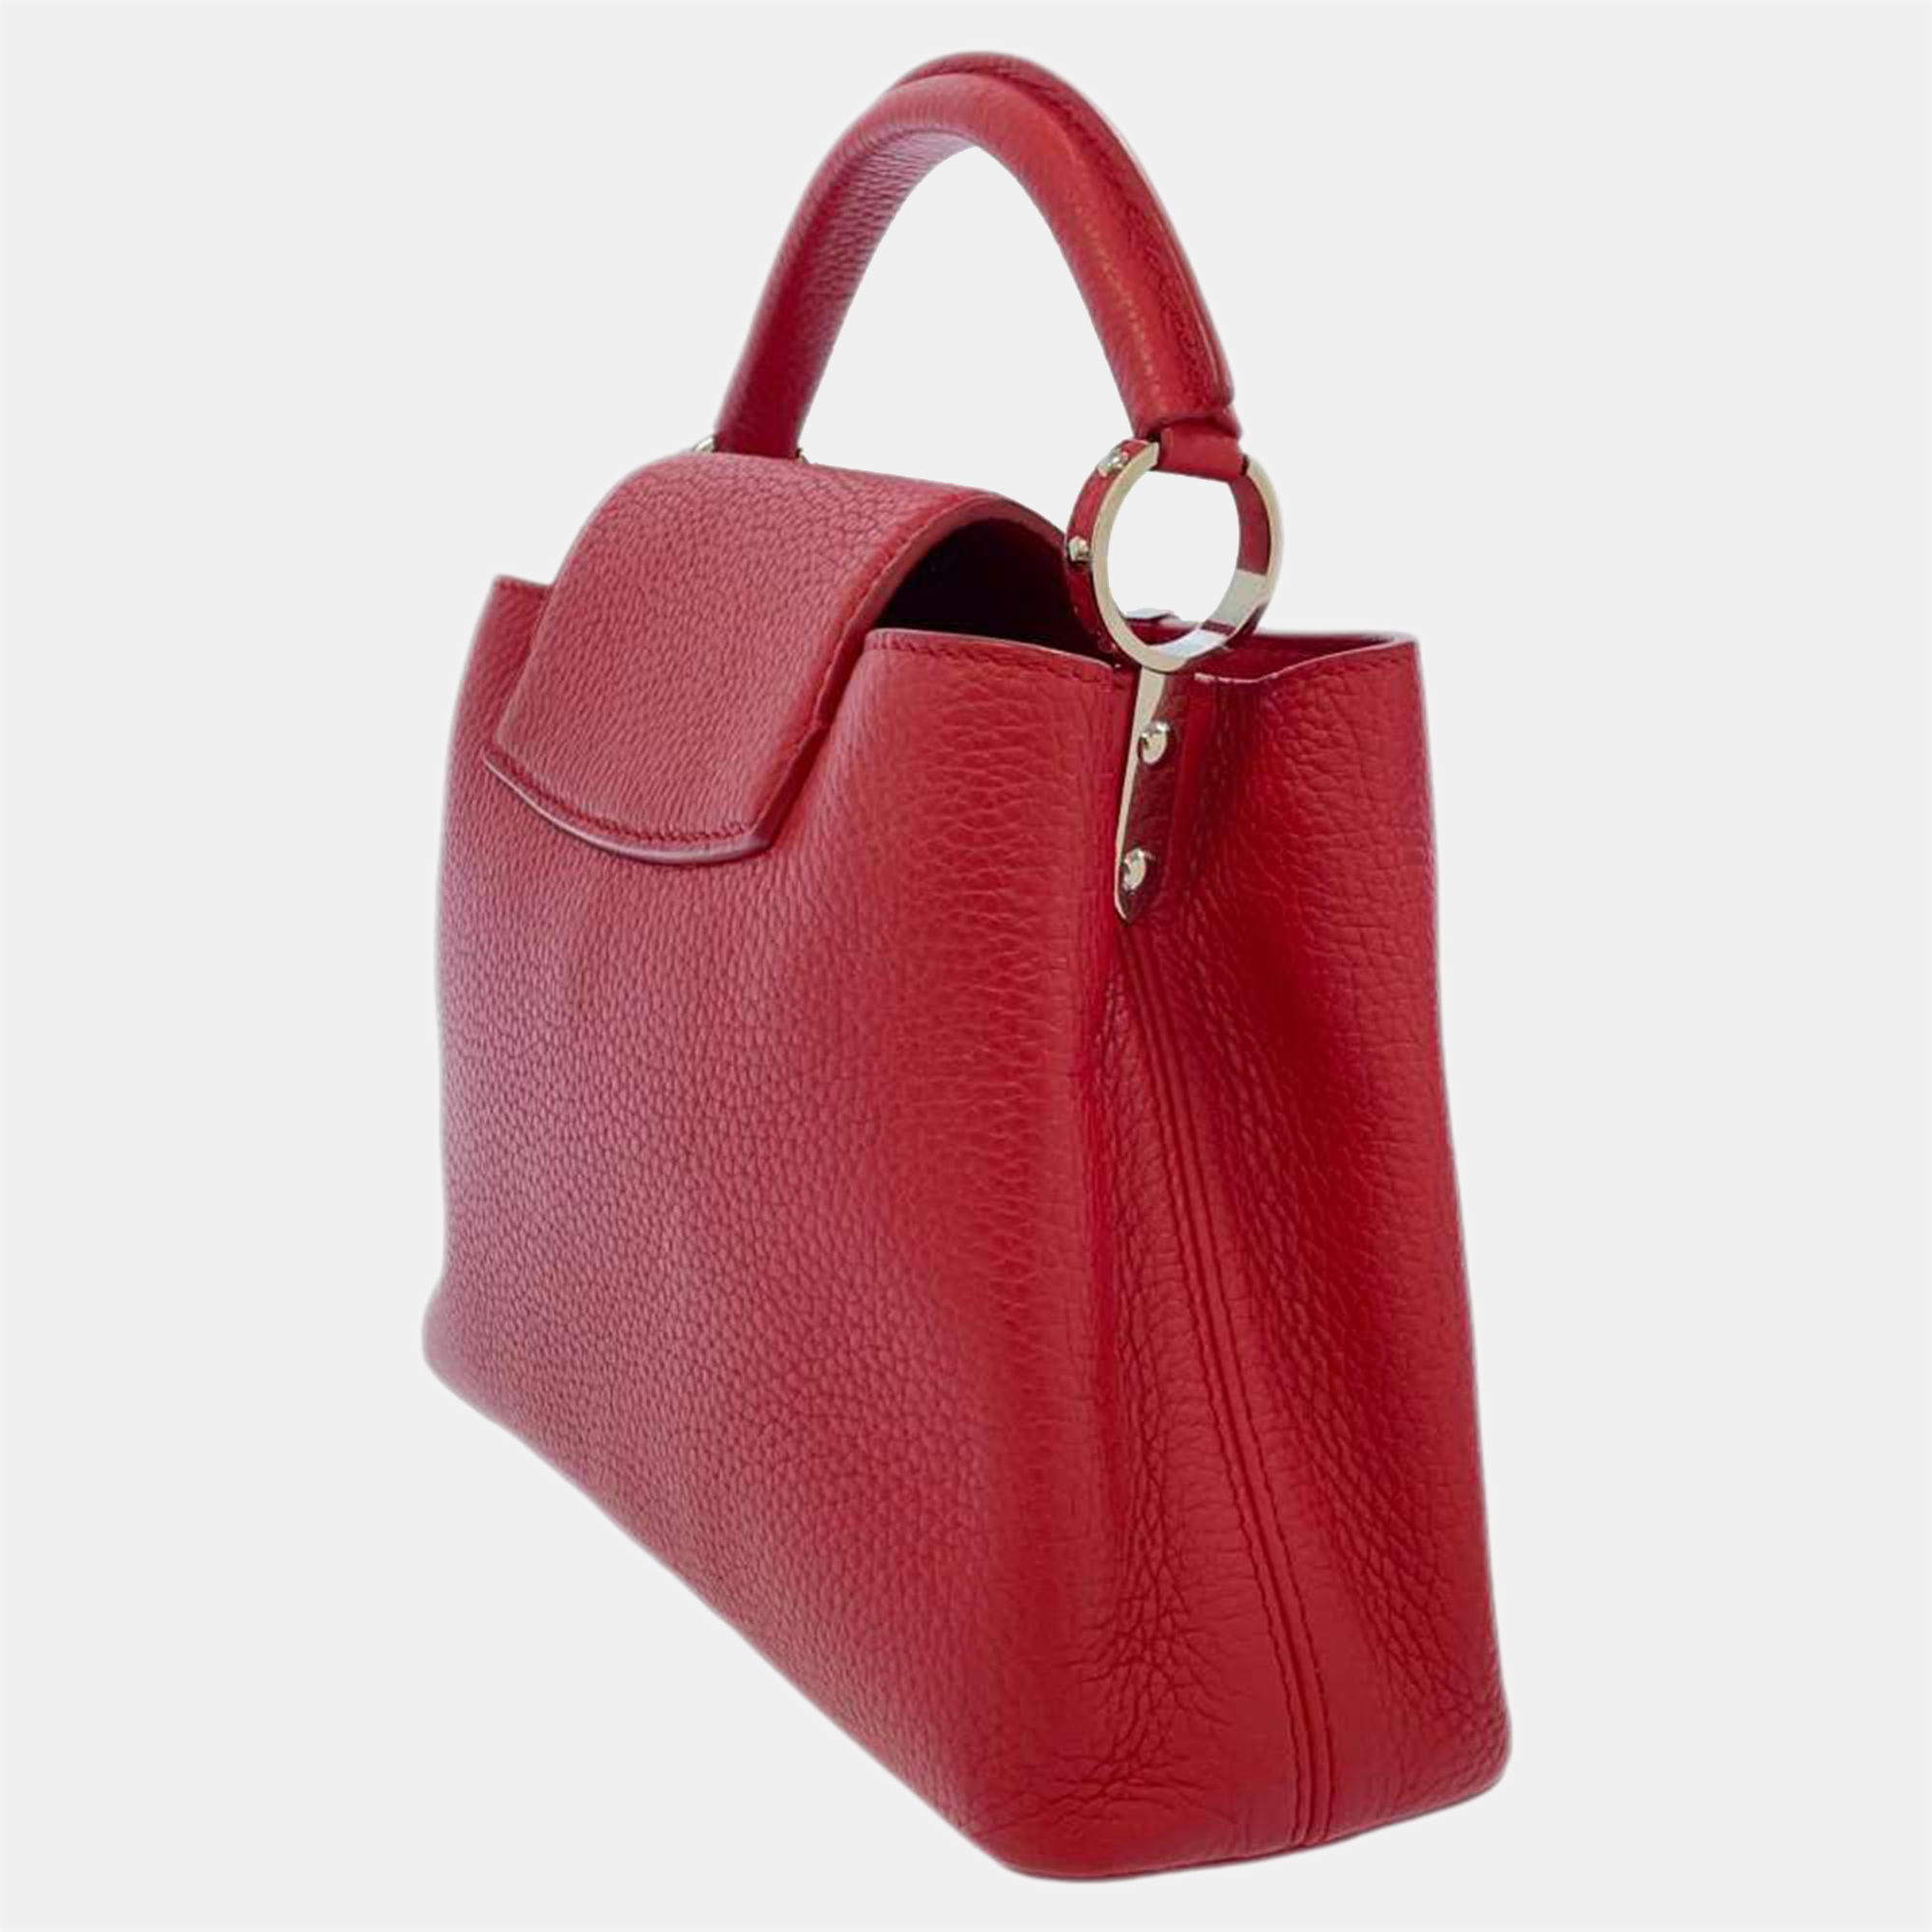 

Louis Vuitton Ruby Taurillon Leather Capucines BB bag, Red